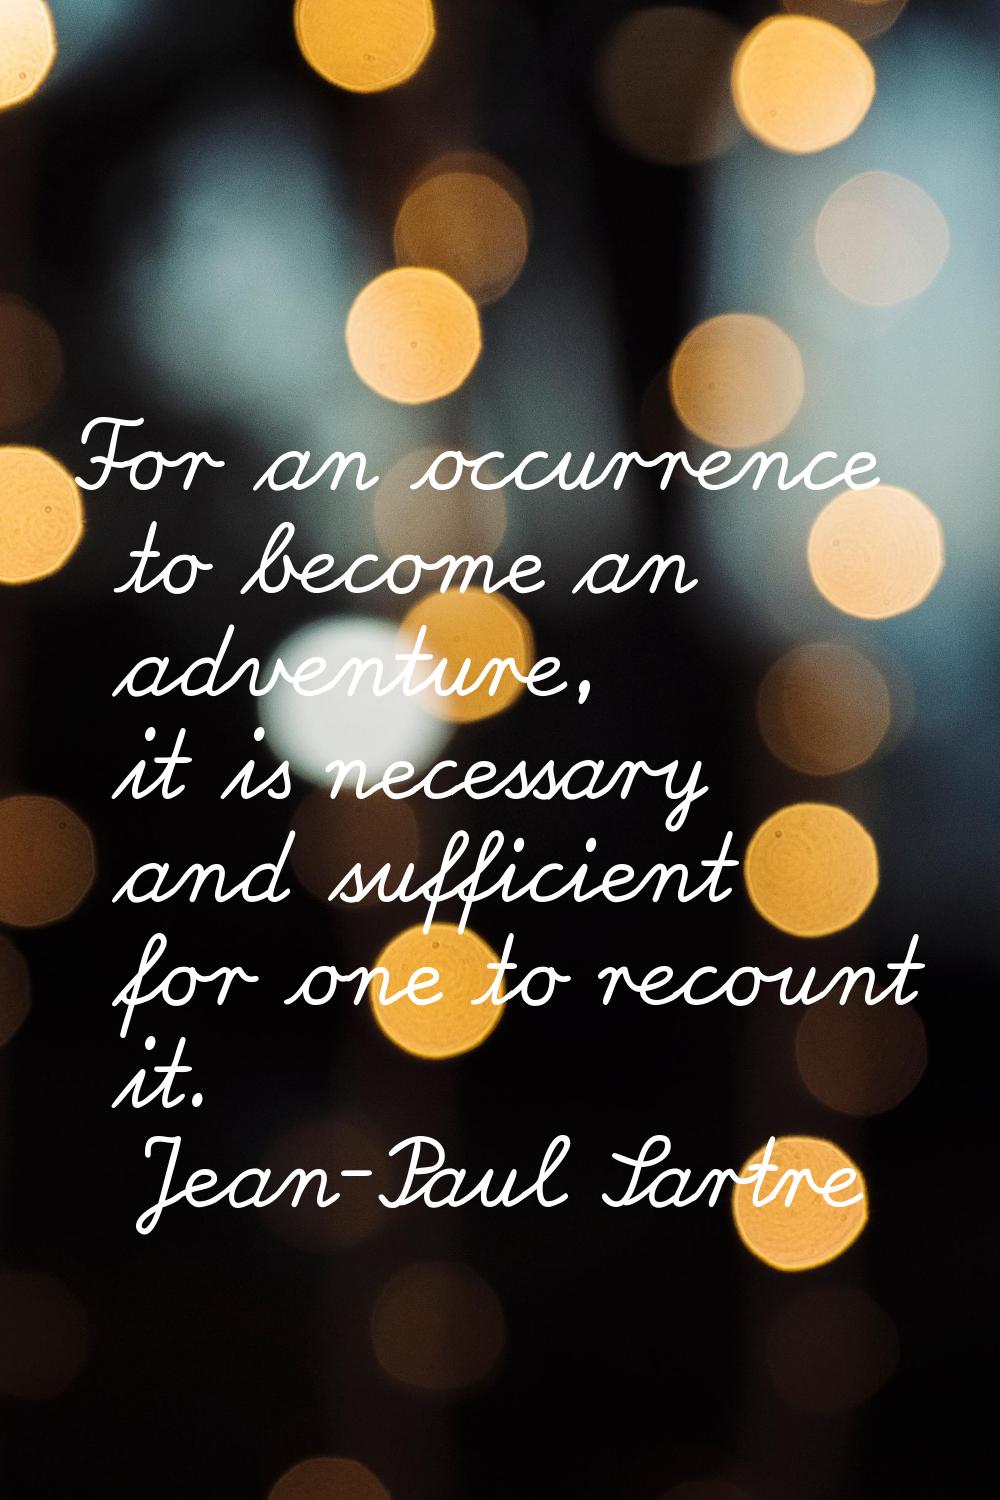 For an occurrence to become an adventure, it is necessary and sufficient for one to recount it.